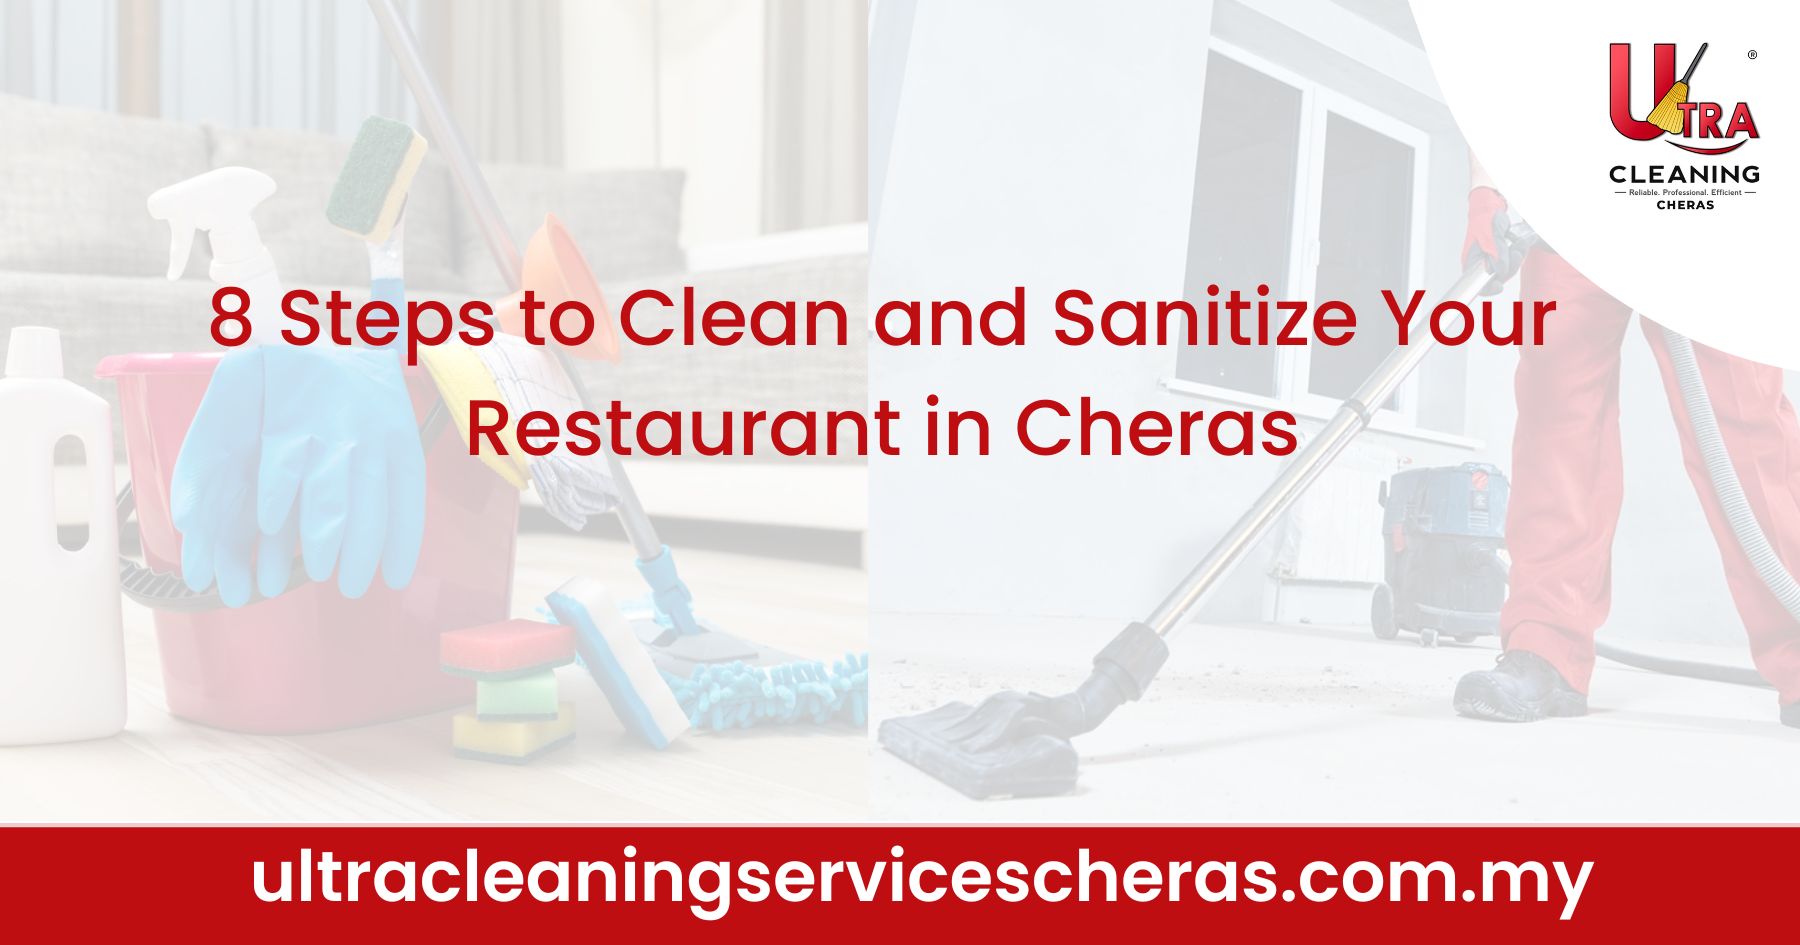 8 Steps to Clean and Sanitize Your Restaurant in Cheras